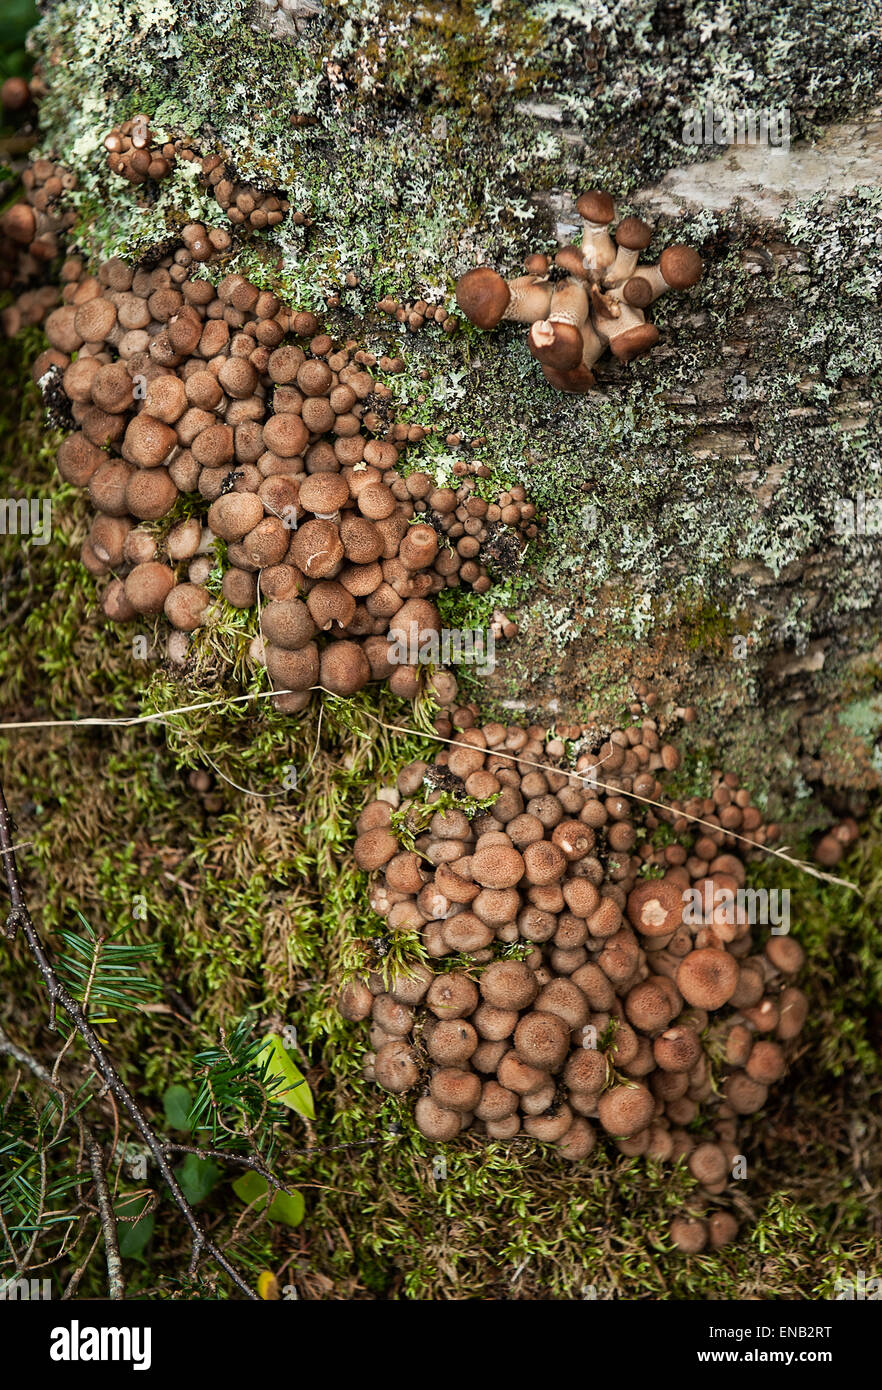 Wild mushrooms and lichen grow on the base of a forest tree, Acadia, Maine, USA Stock Photo